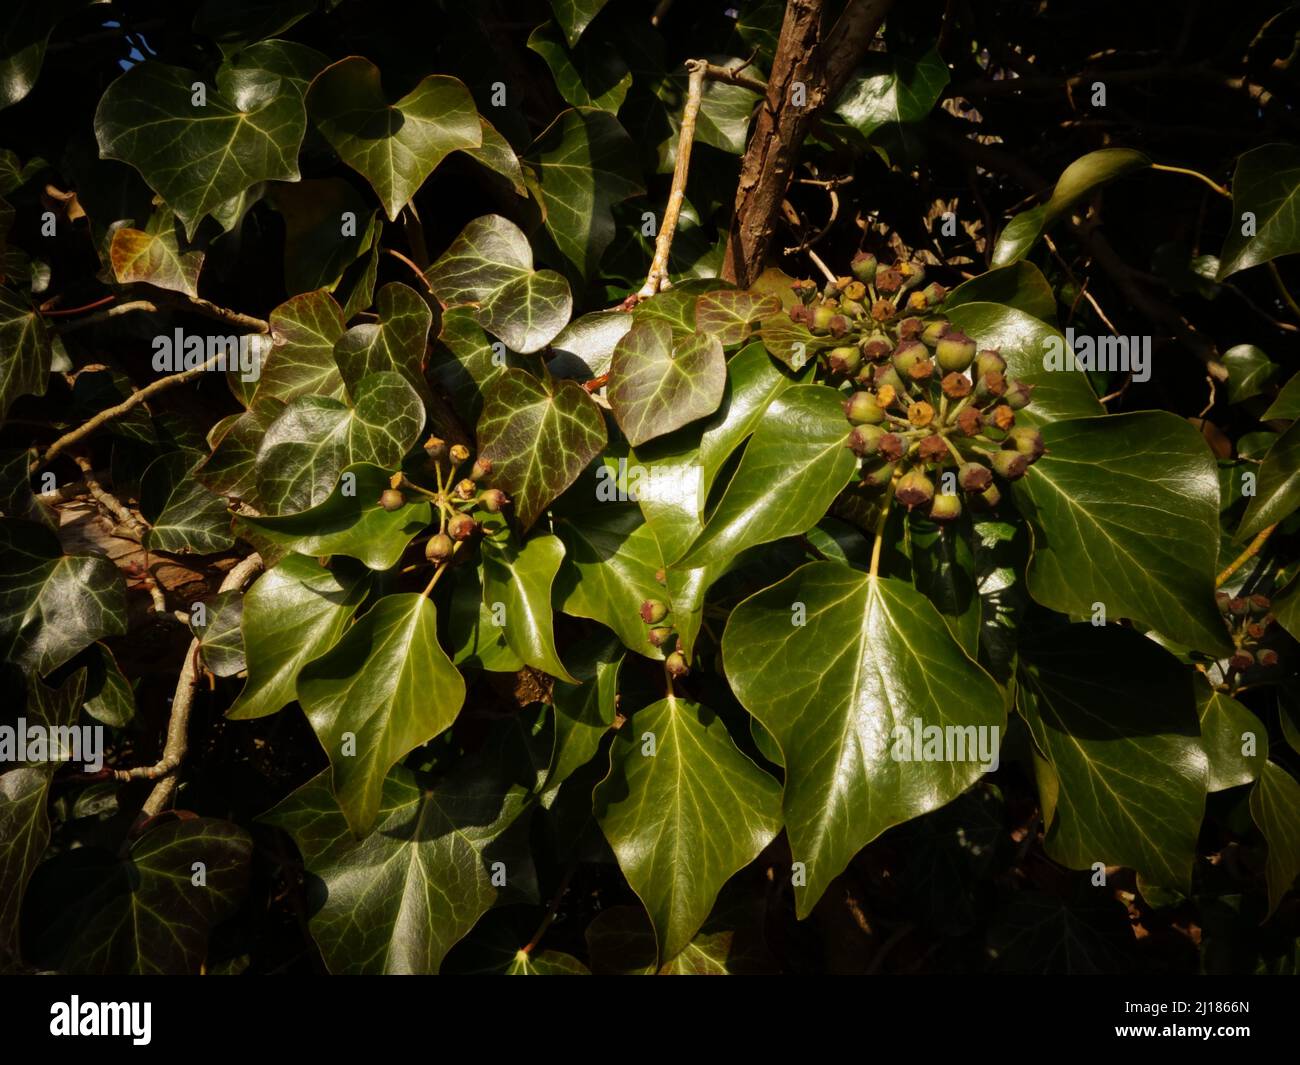 Garden ivy with clusters of unripe berries and beautiful green leaves, a decorative climbing plant, evergreen but a toxic and poisonous garden plant. Stock Photo